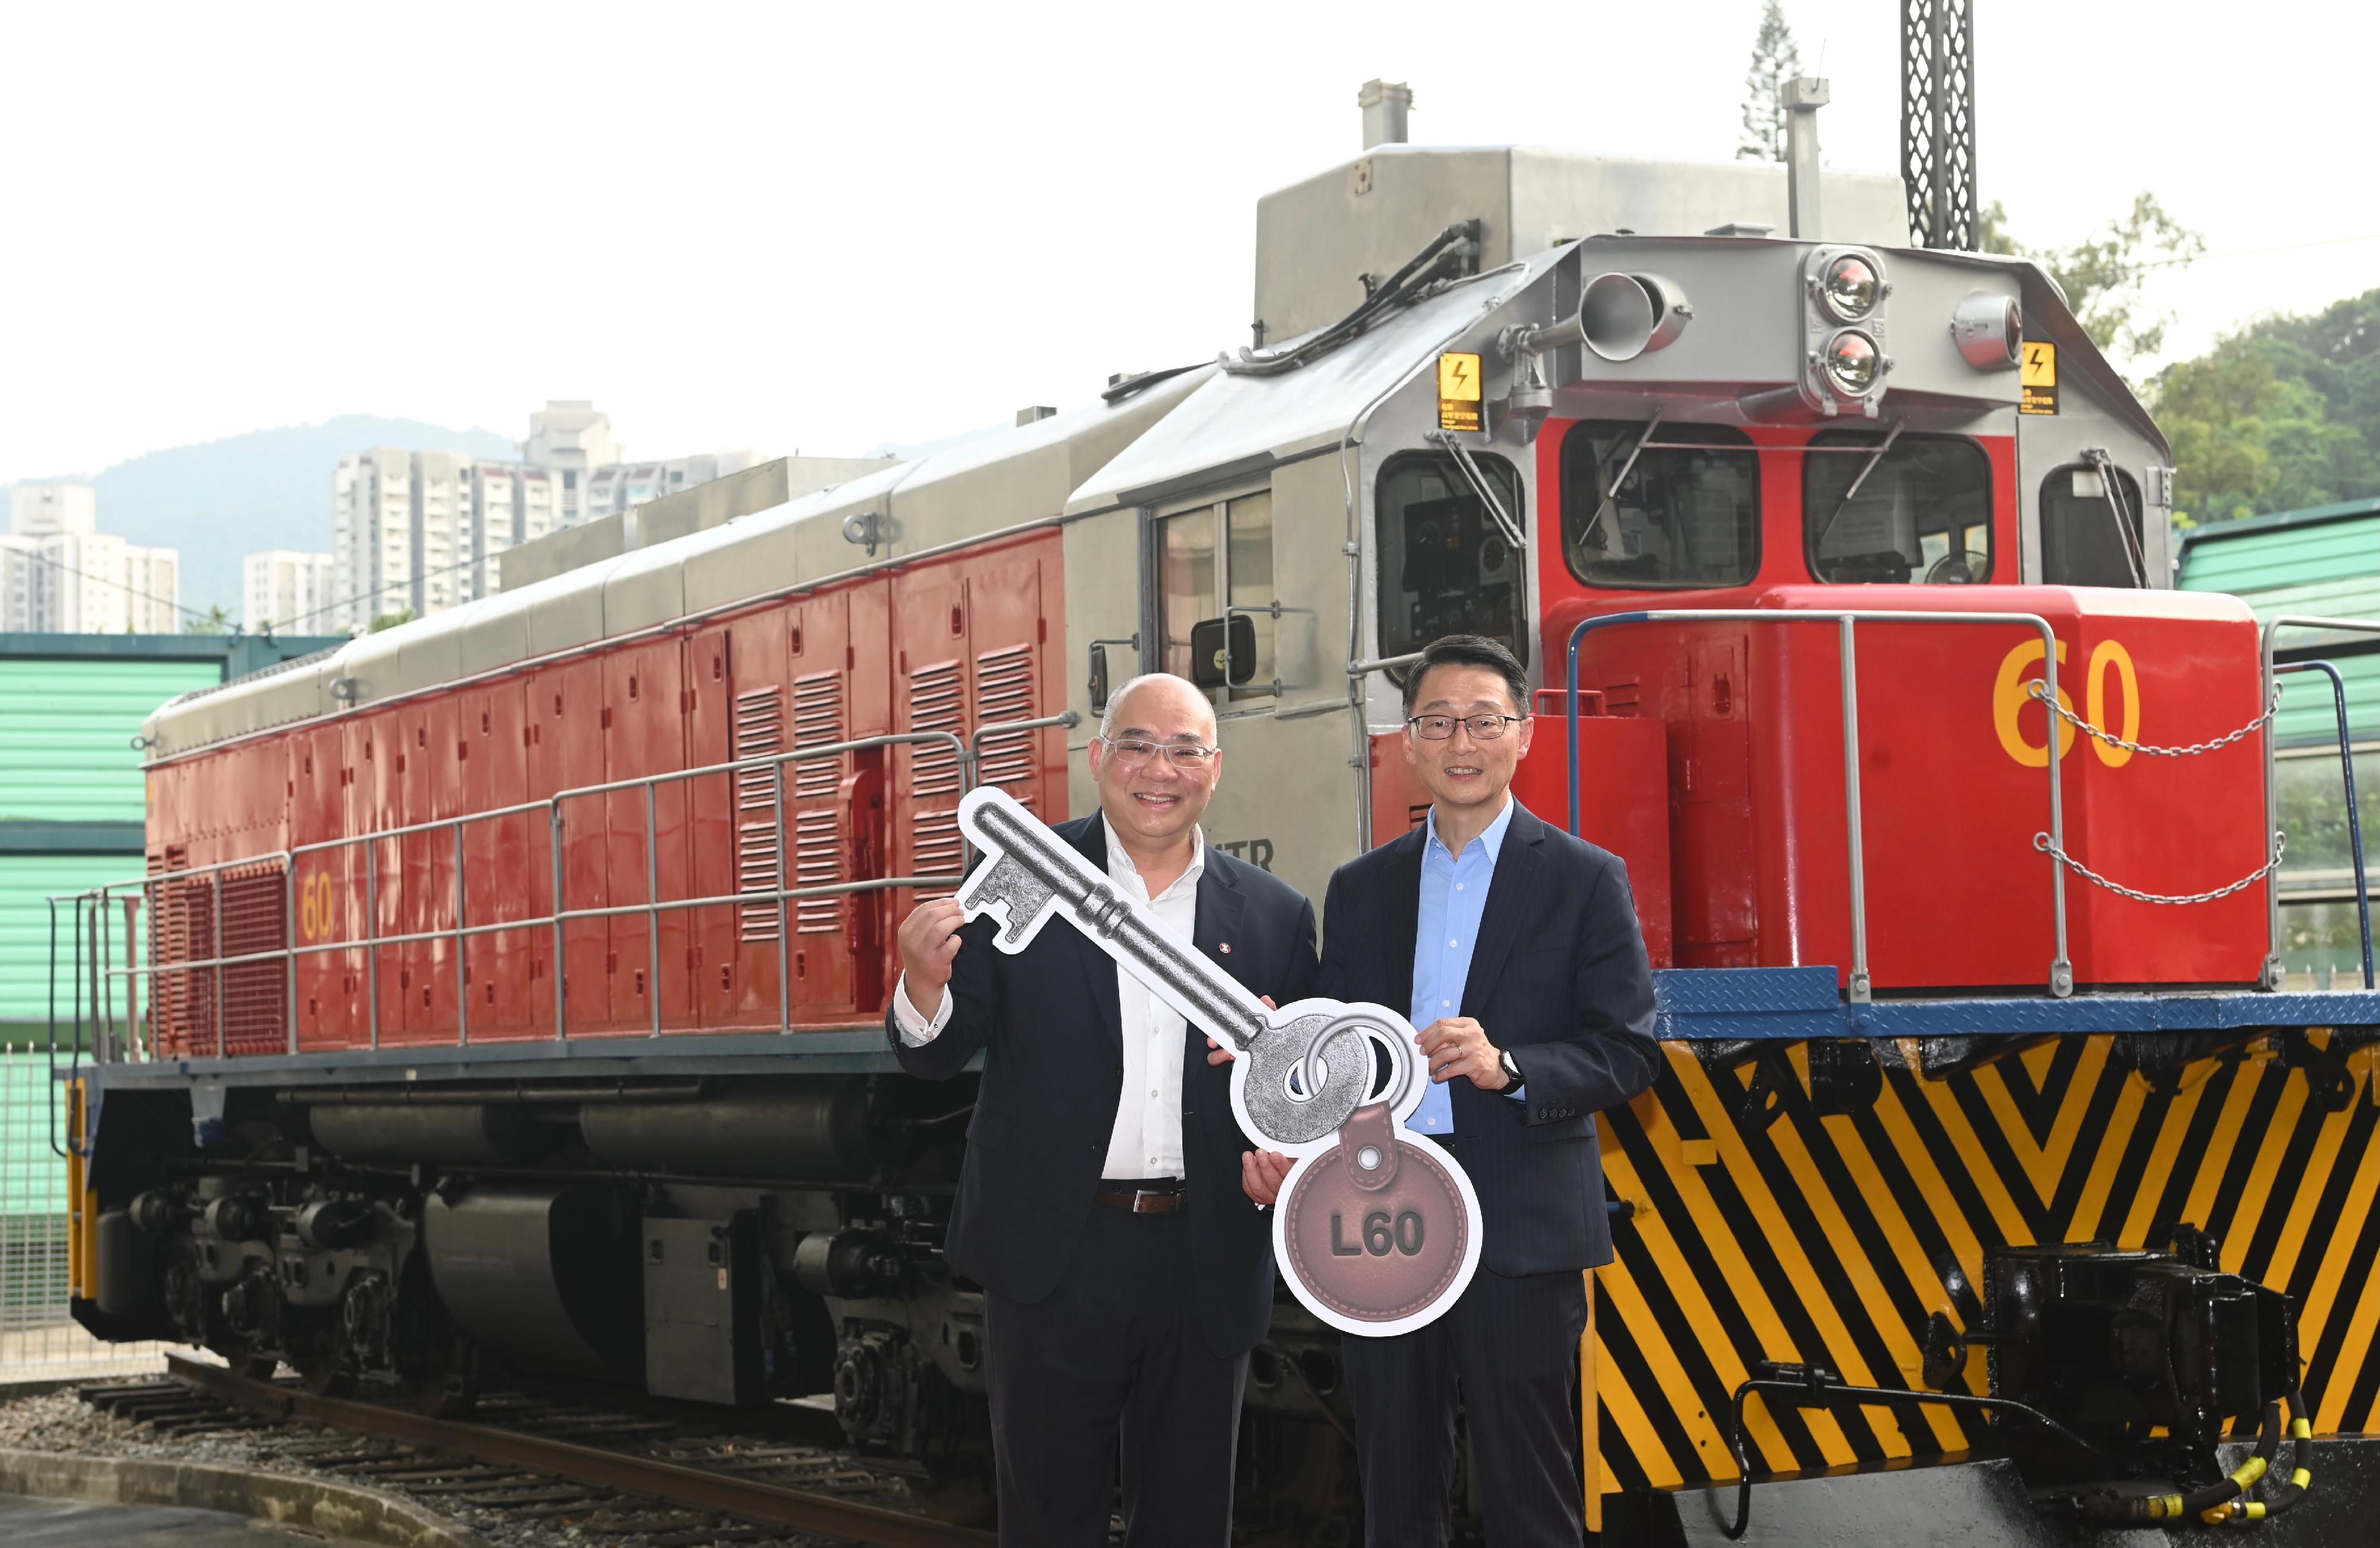 The handover ceremony of Diesel Electric Engine No. 60 was held today (October 3) at the Hong Kong Railway Museum. Photo shows officiating guests the Director of Leisure and Cultural Services, Mr Vincent Liu (right), and the Operations and Innovation Director of the MTR Corporation Limited, Dr Tony Lee (left), at the ceremony. 